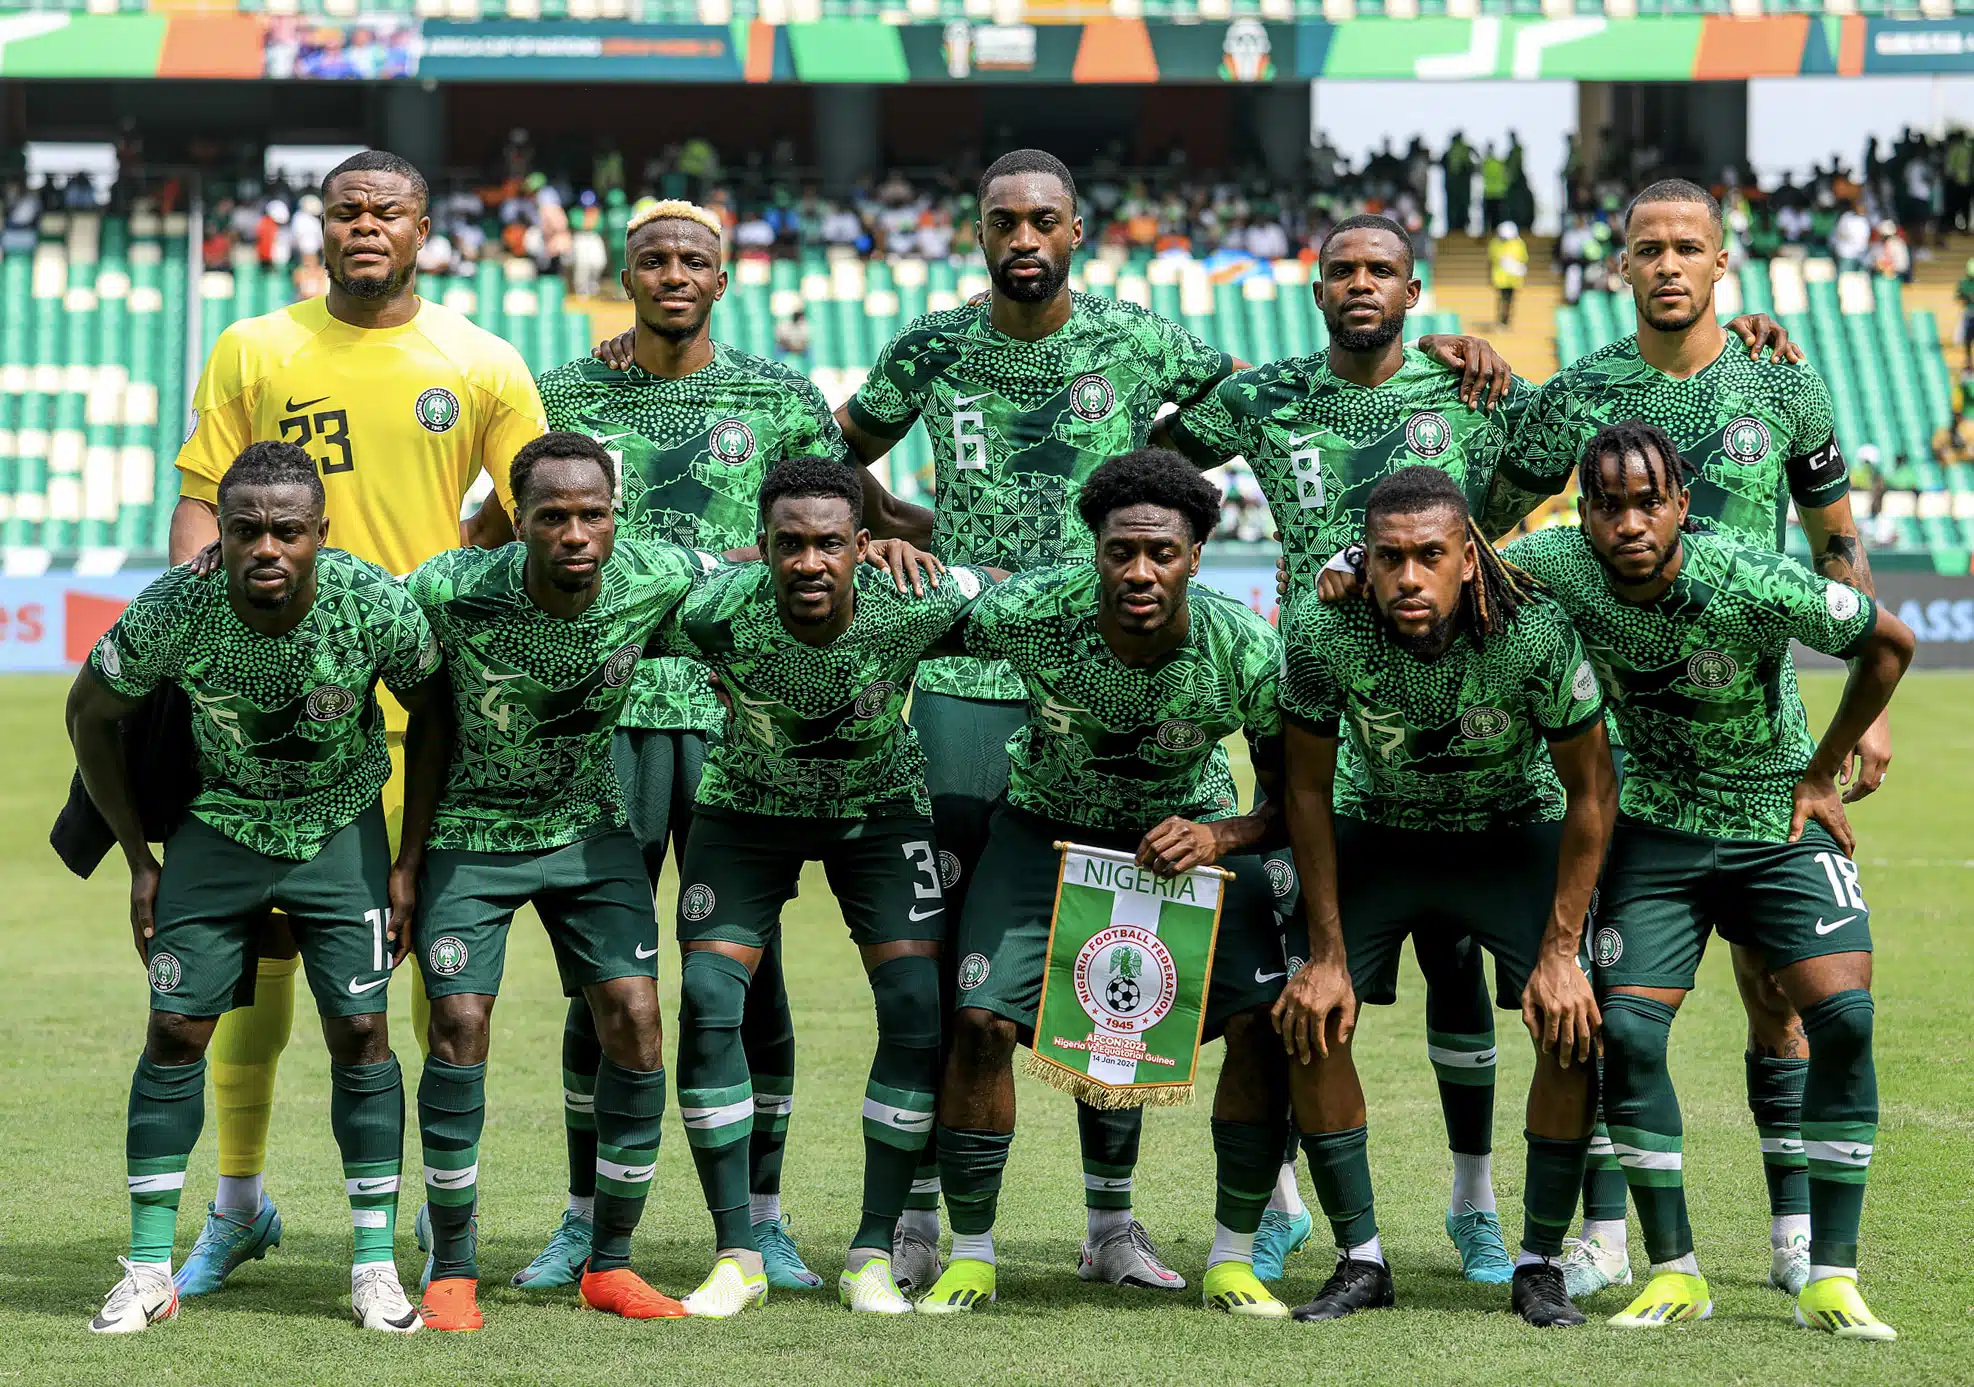 AFCON: Super Eagles of Nigeria beat Cameroon to reach quarterfinals